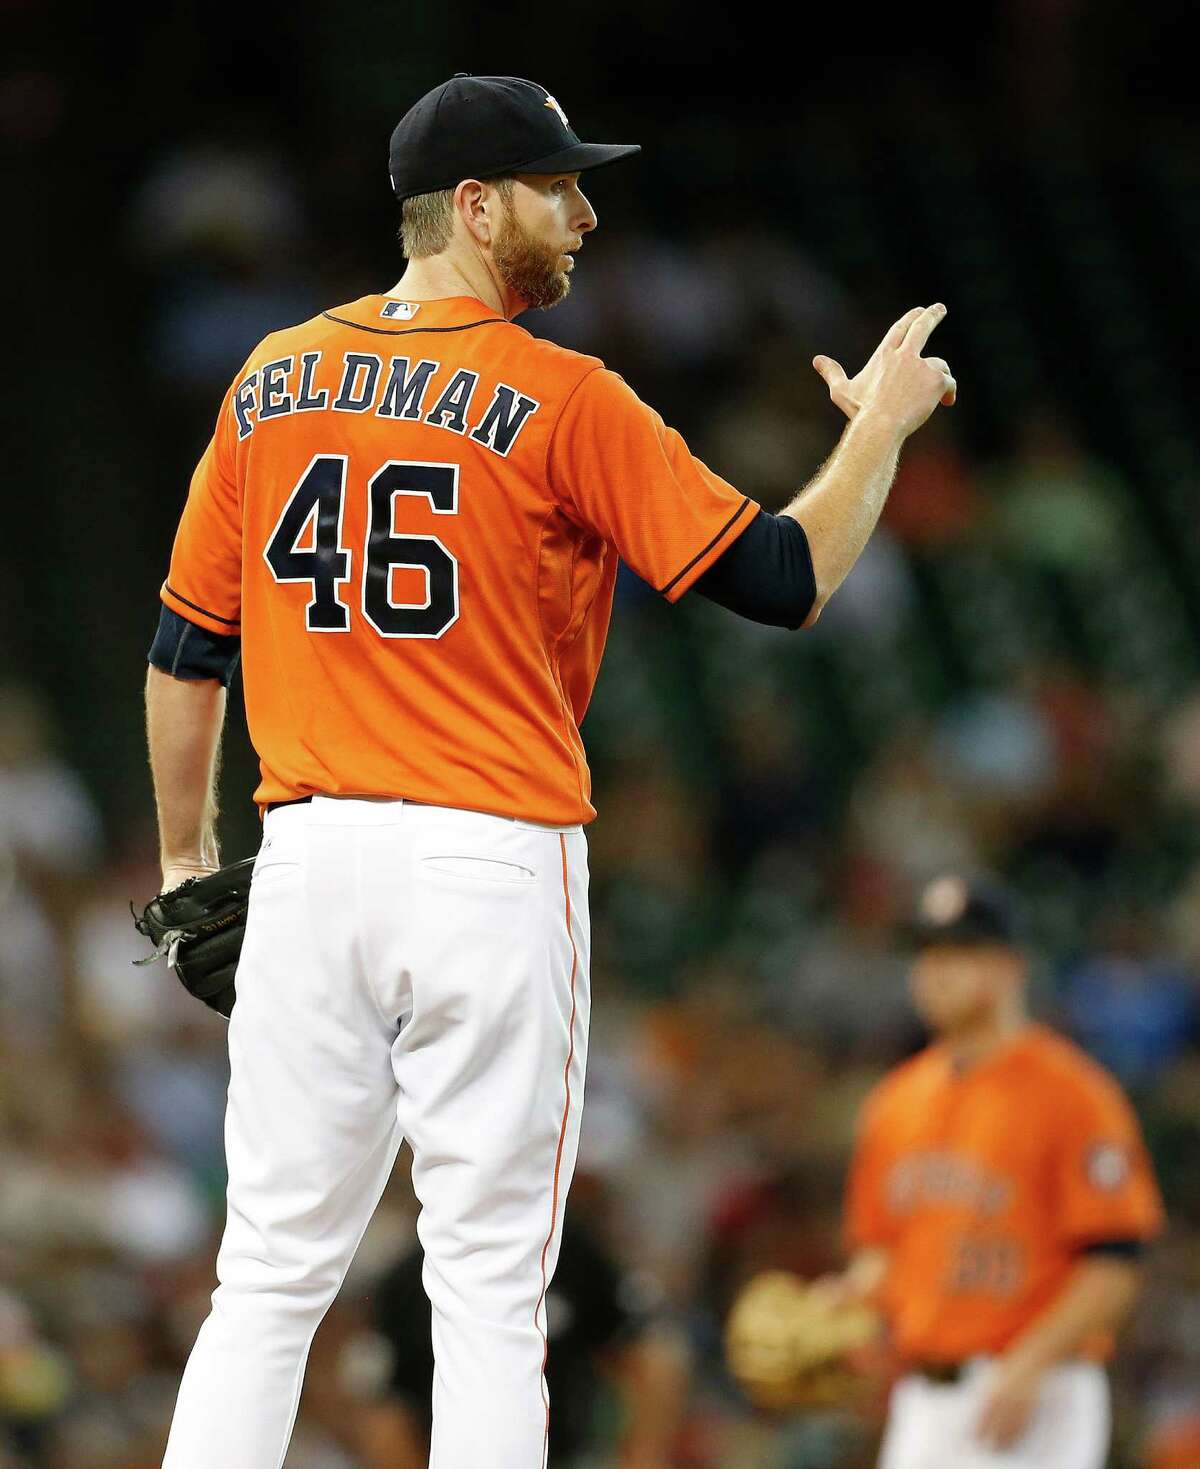 Astros starting pitcher Scott Feldman (46) took the loss after allowing seven runs in 51⁄3 innings against the Red Sox on Friday night.